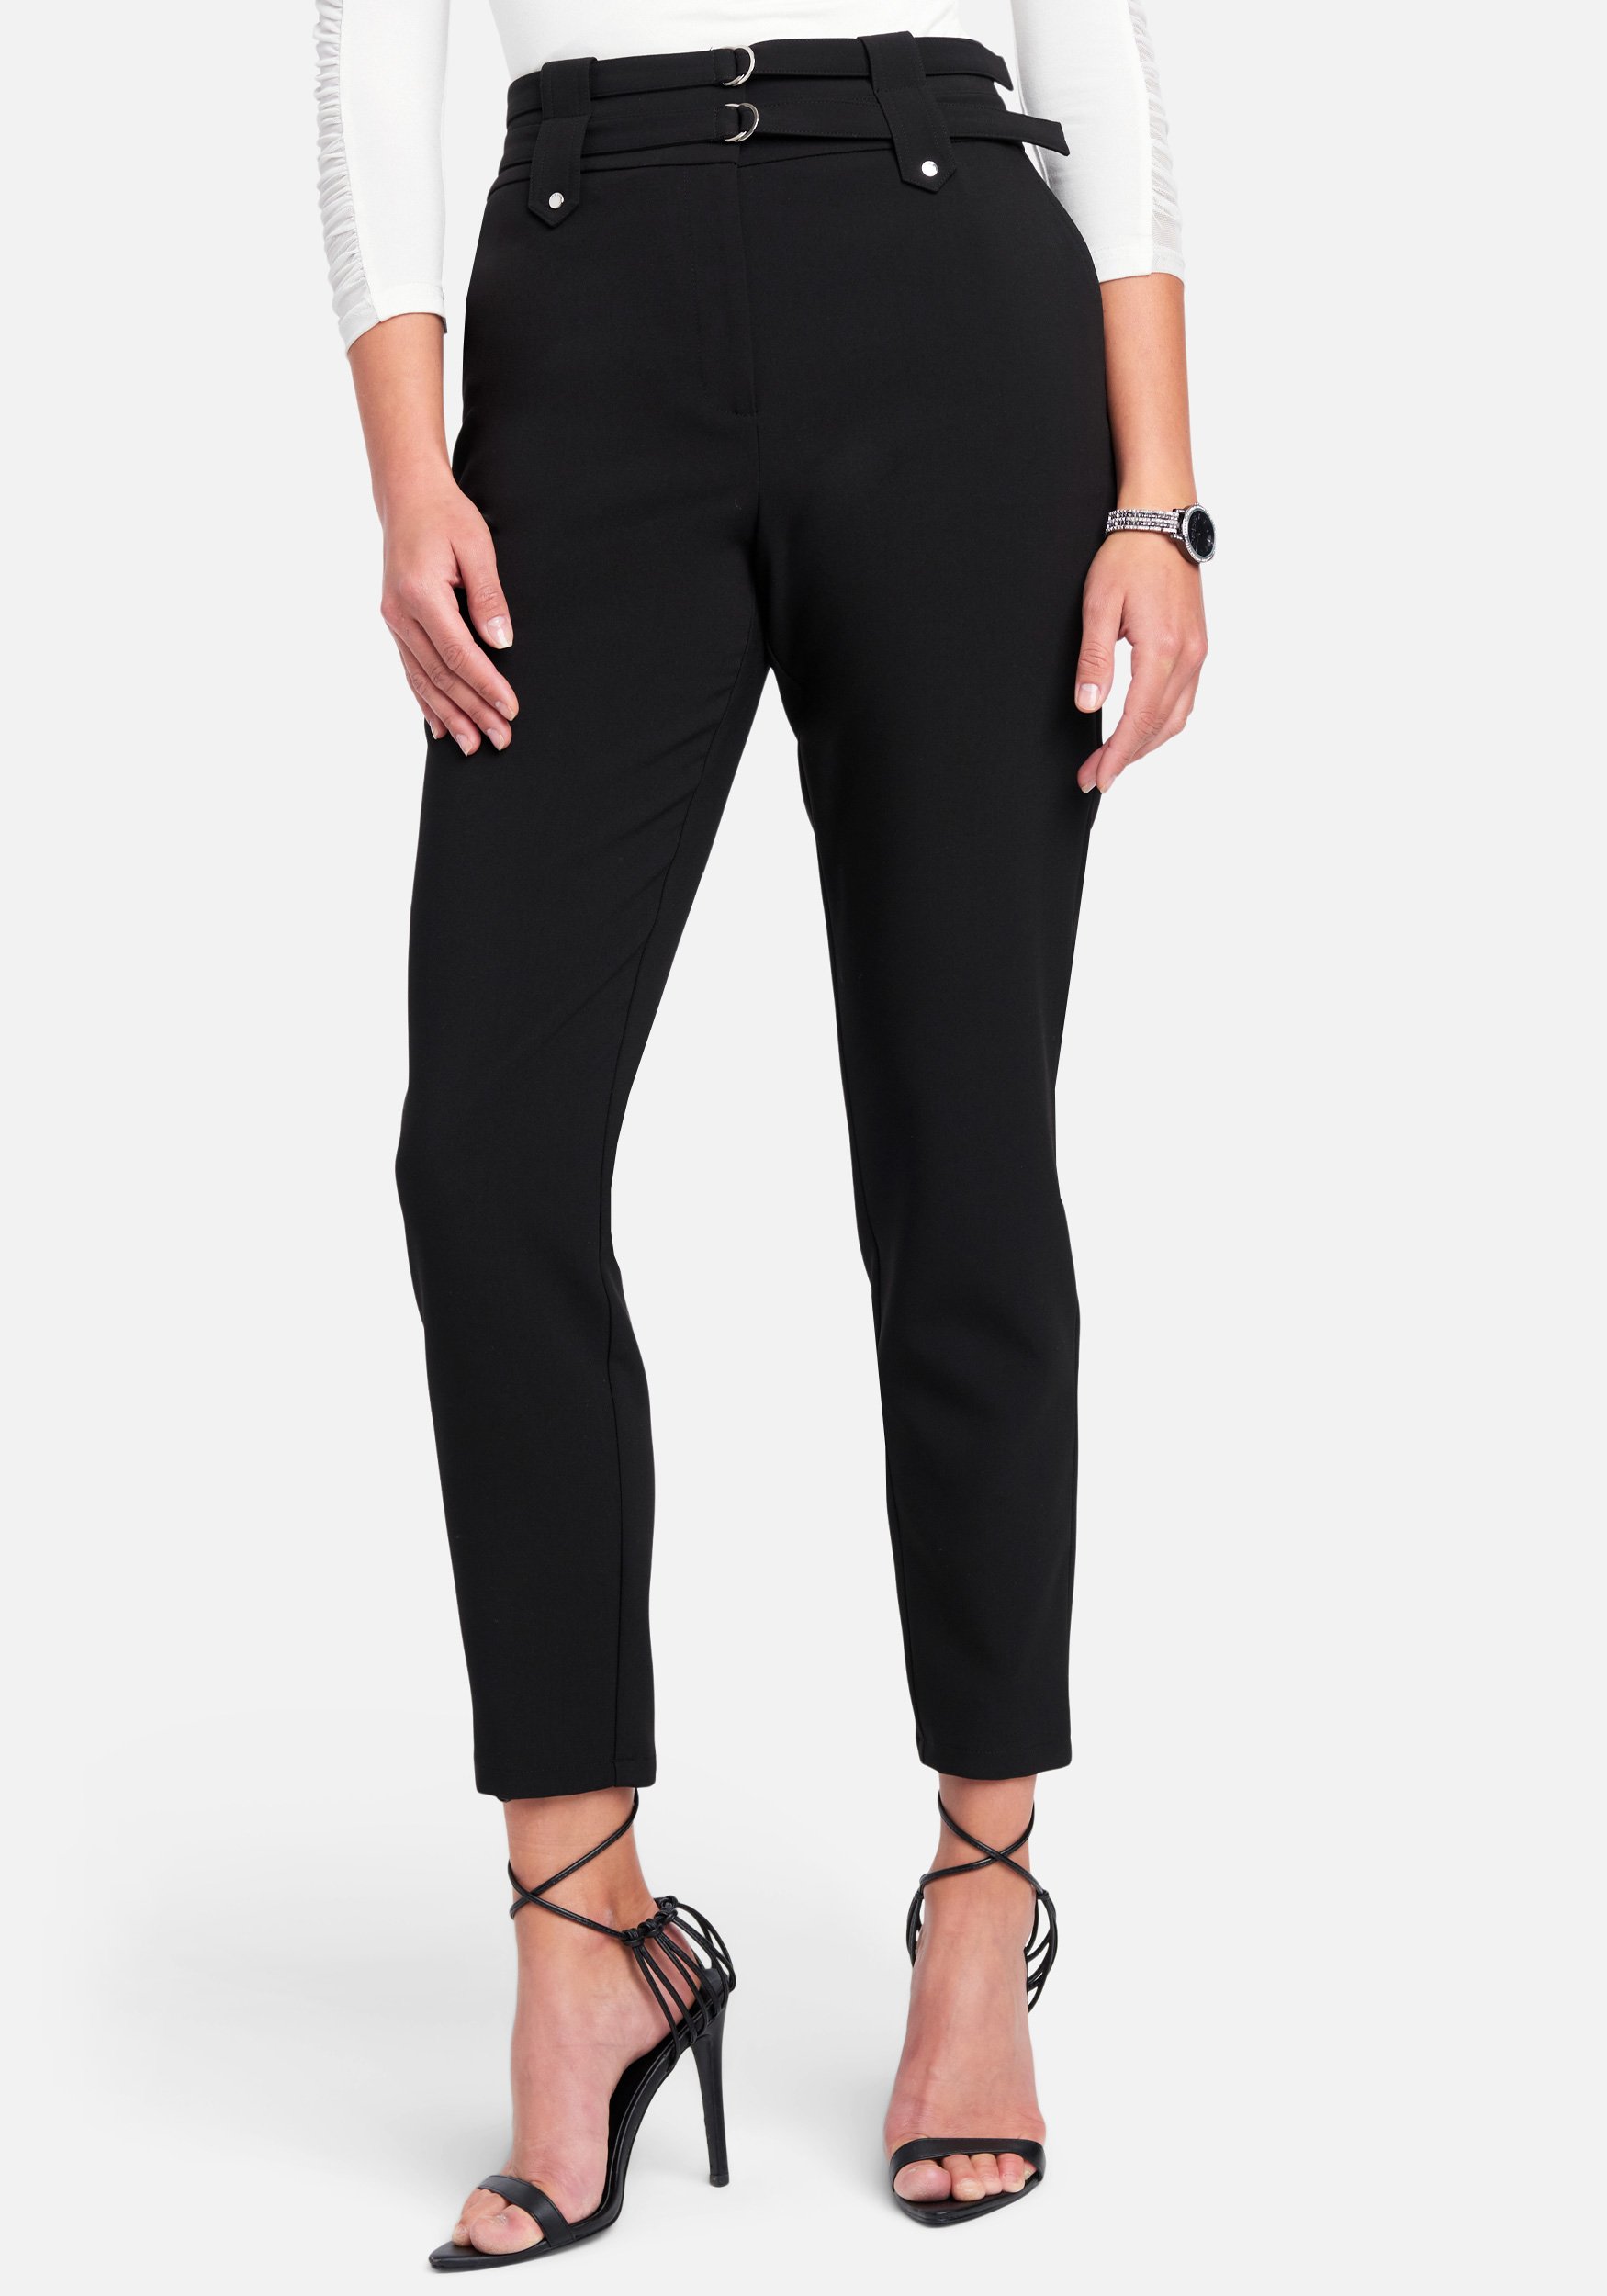 Bebe Women's Double Banded Stretch Twill Pant, Size 12 in Black Spandex/Viscose